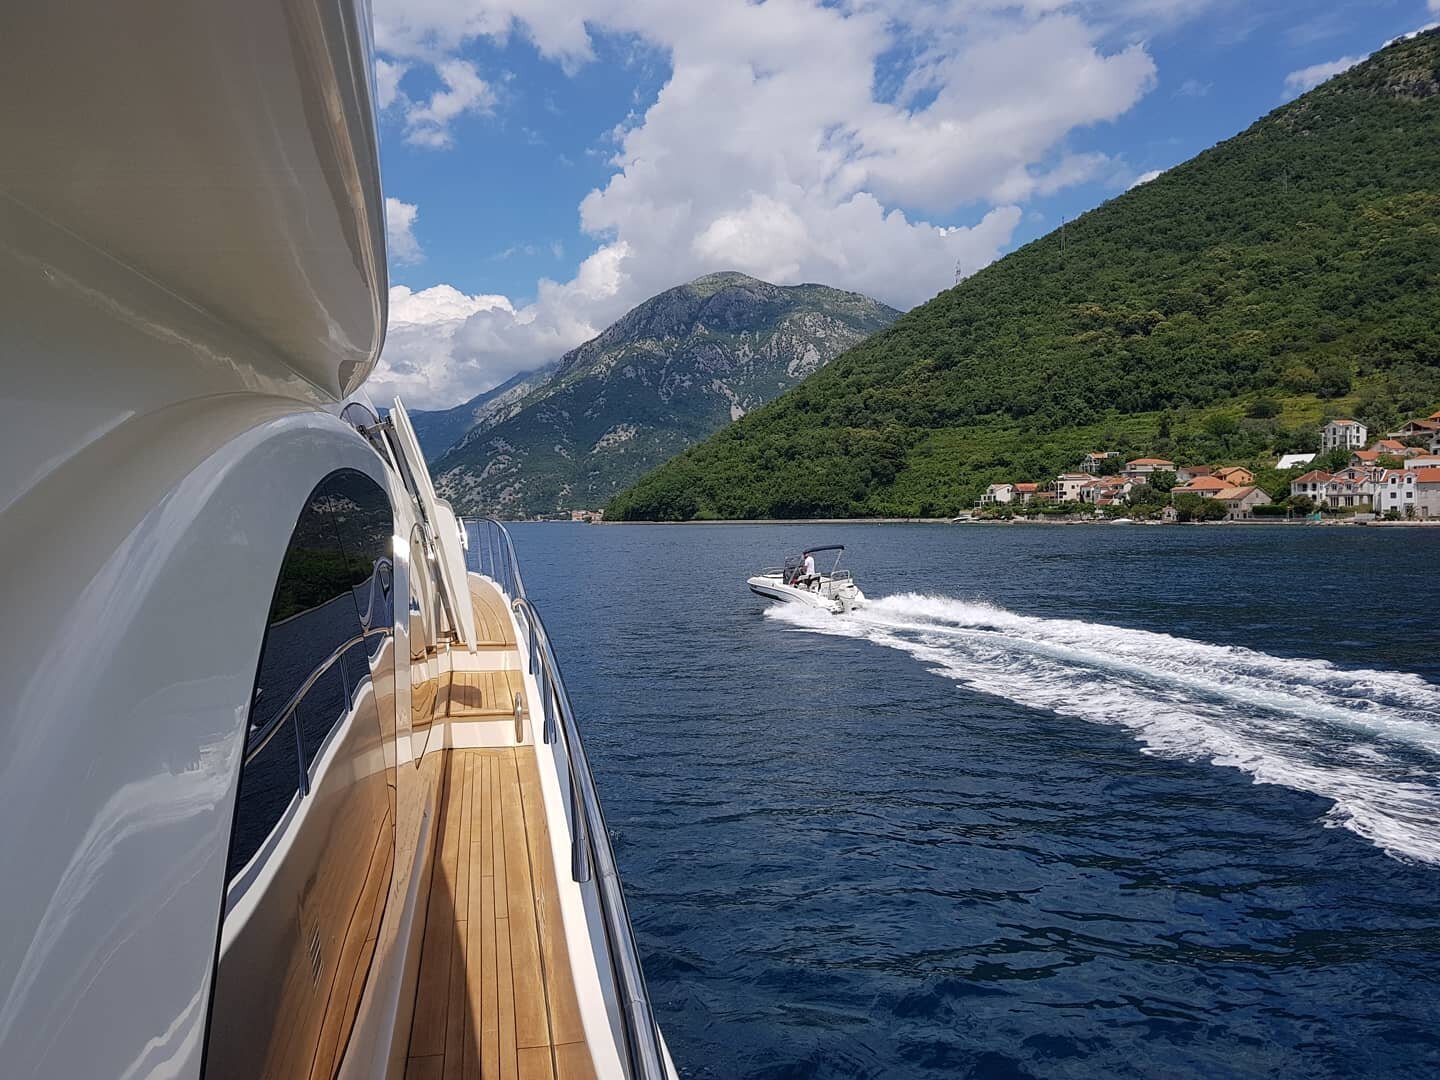 Life is what you make of it. We like it like this. 
Simply a #levelUP 
#alistservice #alistgroupyachting #alistgroup #yachting #montenegro #montenegroyachting #lifestyle #charter #mne #projectlife #adriaricyachting #adriaticcoast #kotorbay #follow #l